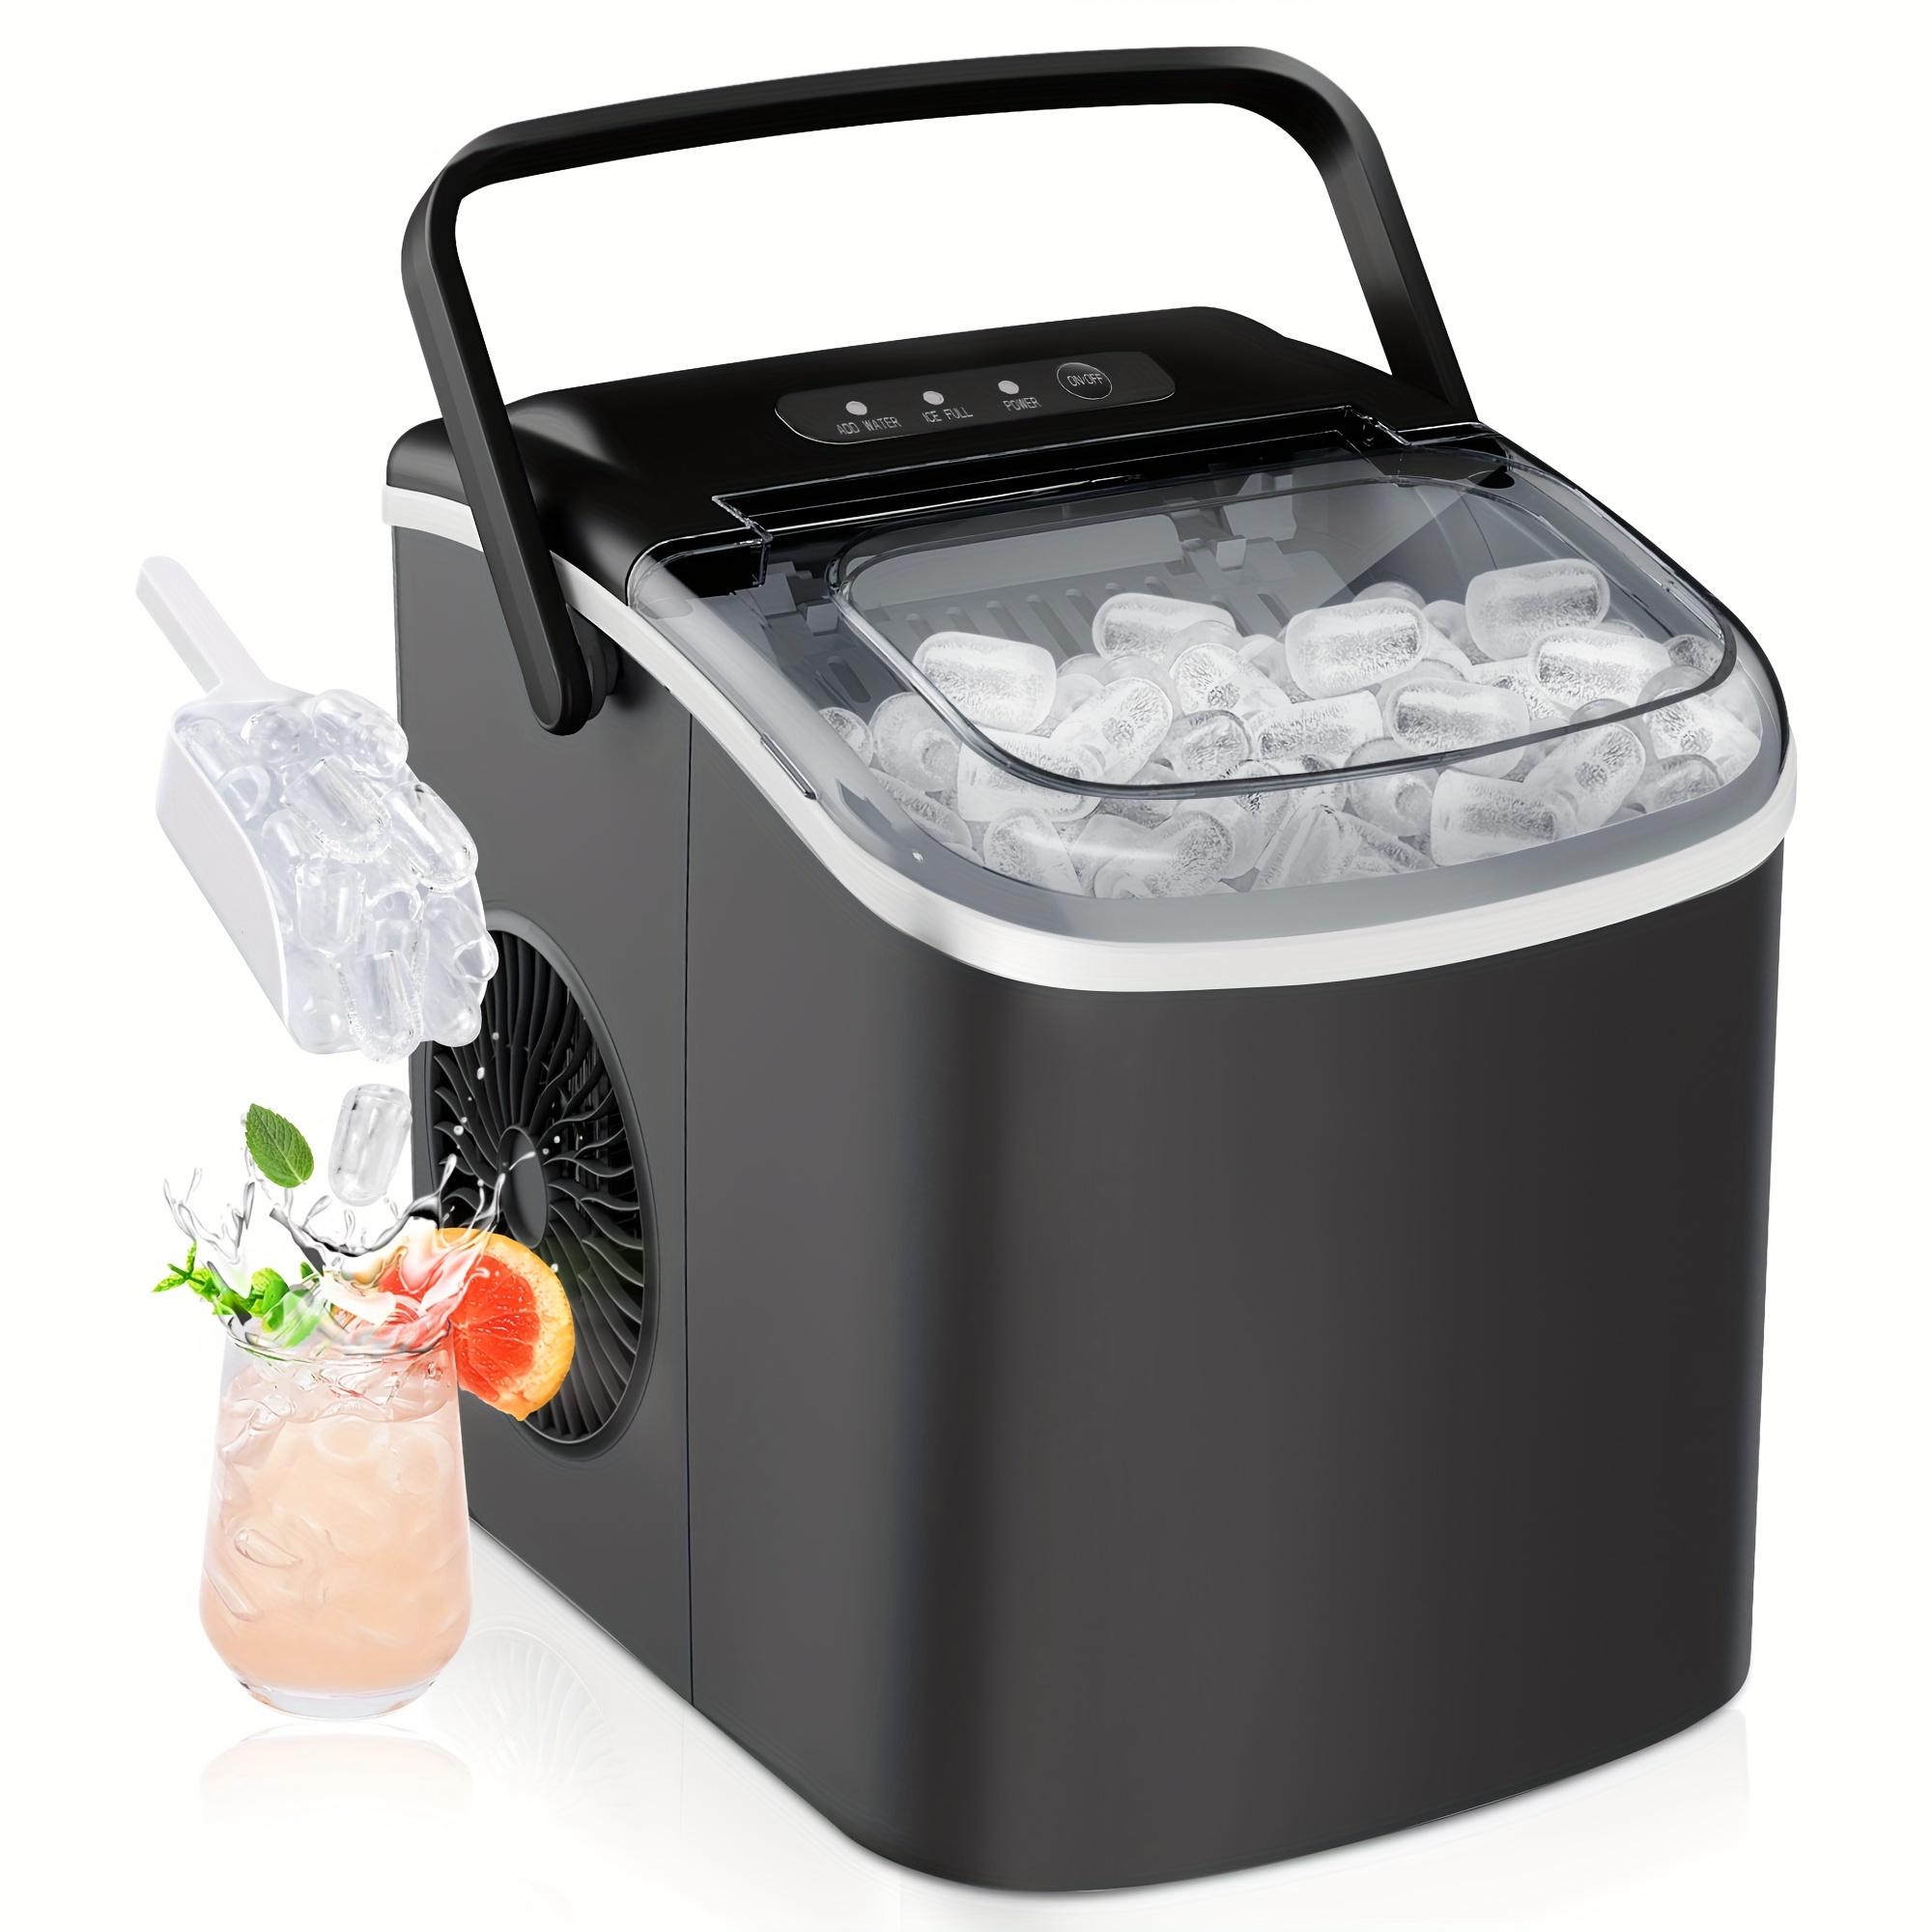 

High-efficiency Ice Maker: 26.5 Pounds Daily Capacity, Quick 6-minute Production Of 9 Bullet Ice Cubes - Compact And Self-cleaning Design, Ideal For Homes, Kitchens, Rvs, And Parties.